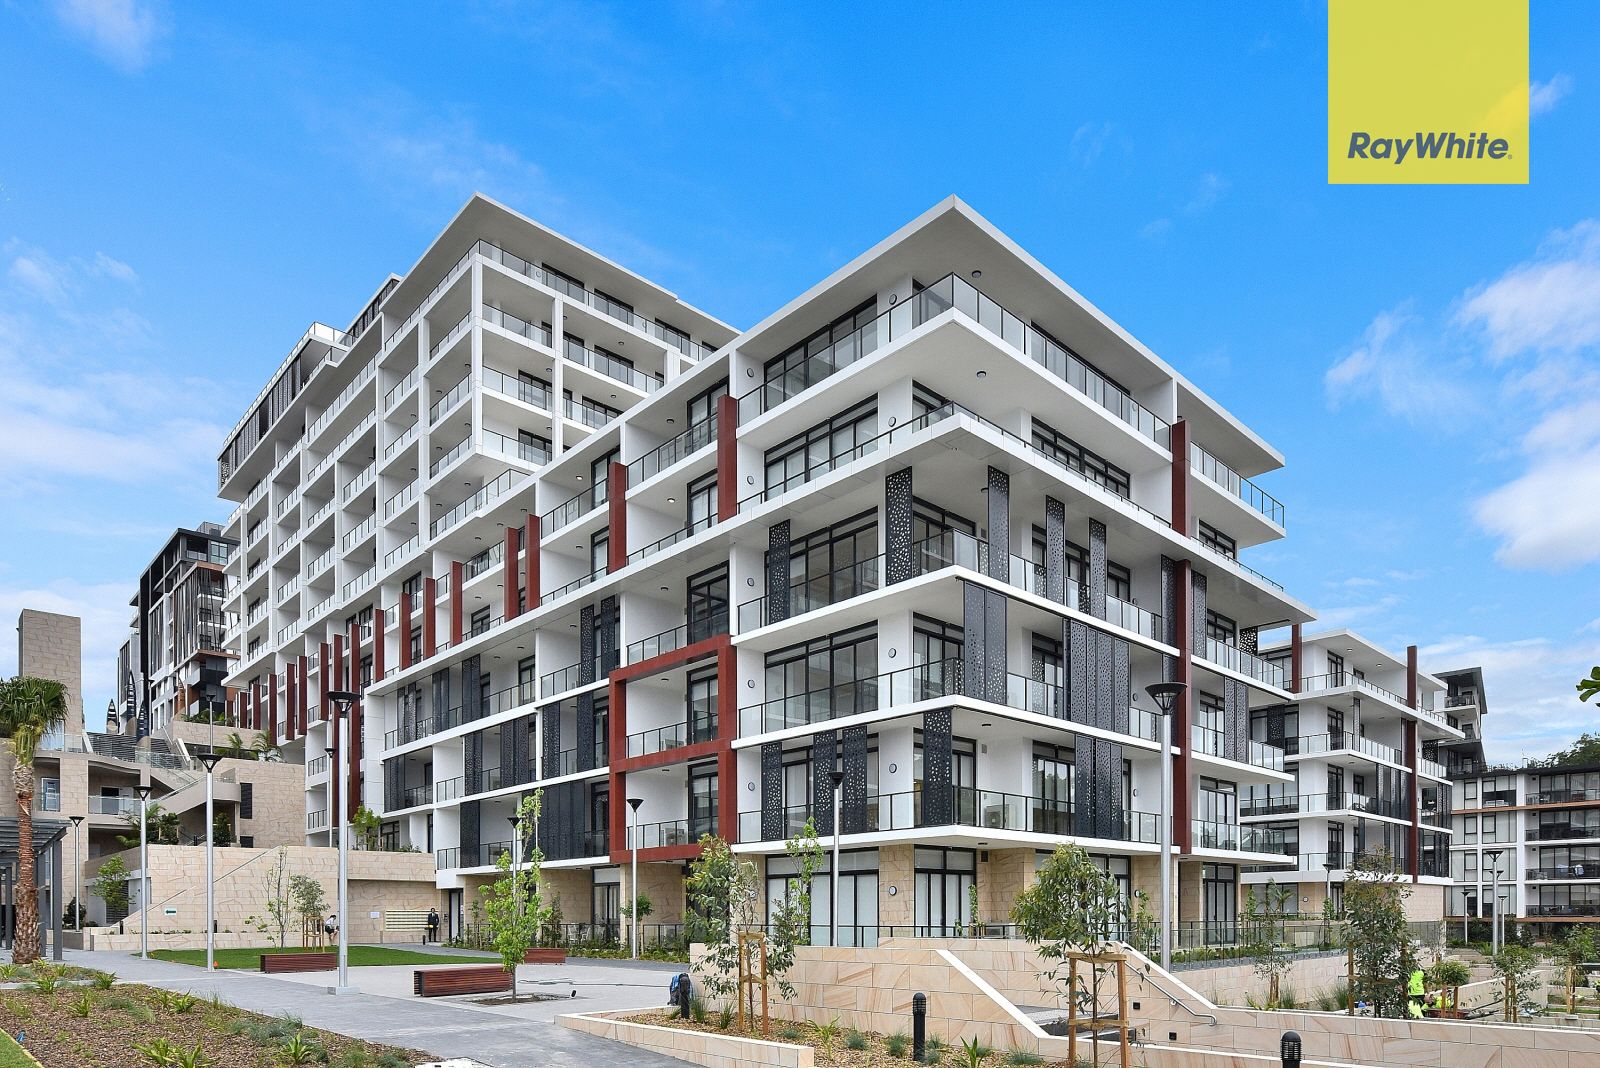 2 bedrooms Apartment / Unit / Flat in D310/6 Nancarrow Ave. RYDE NSW, 2112